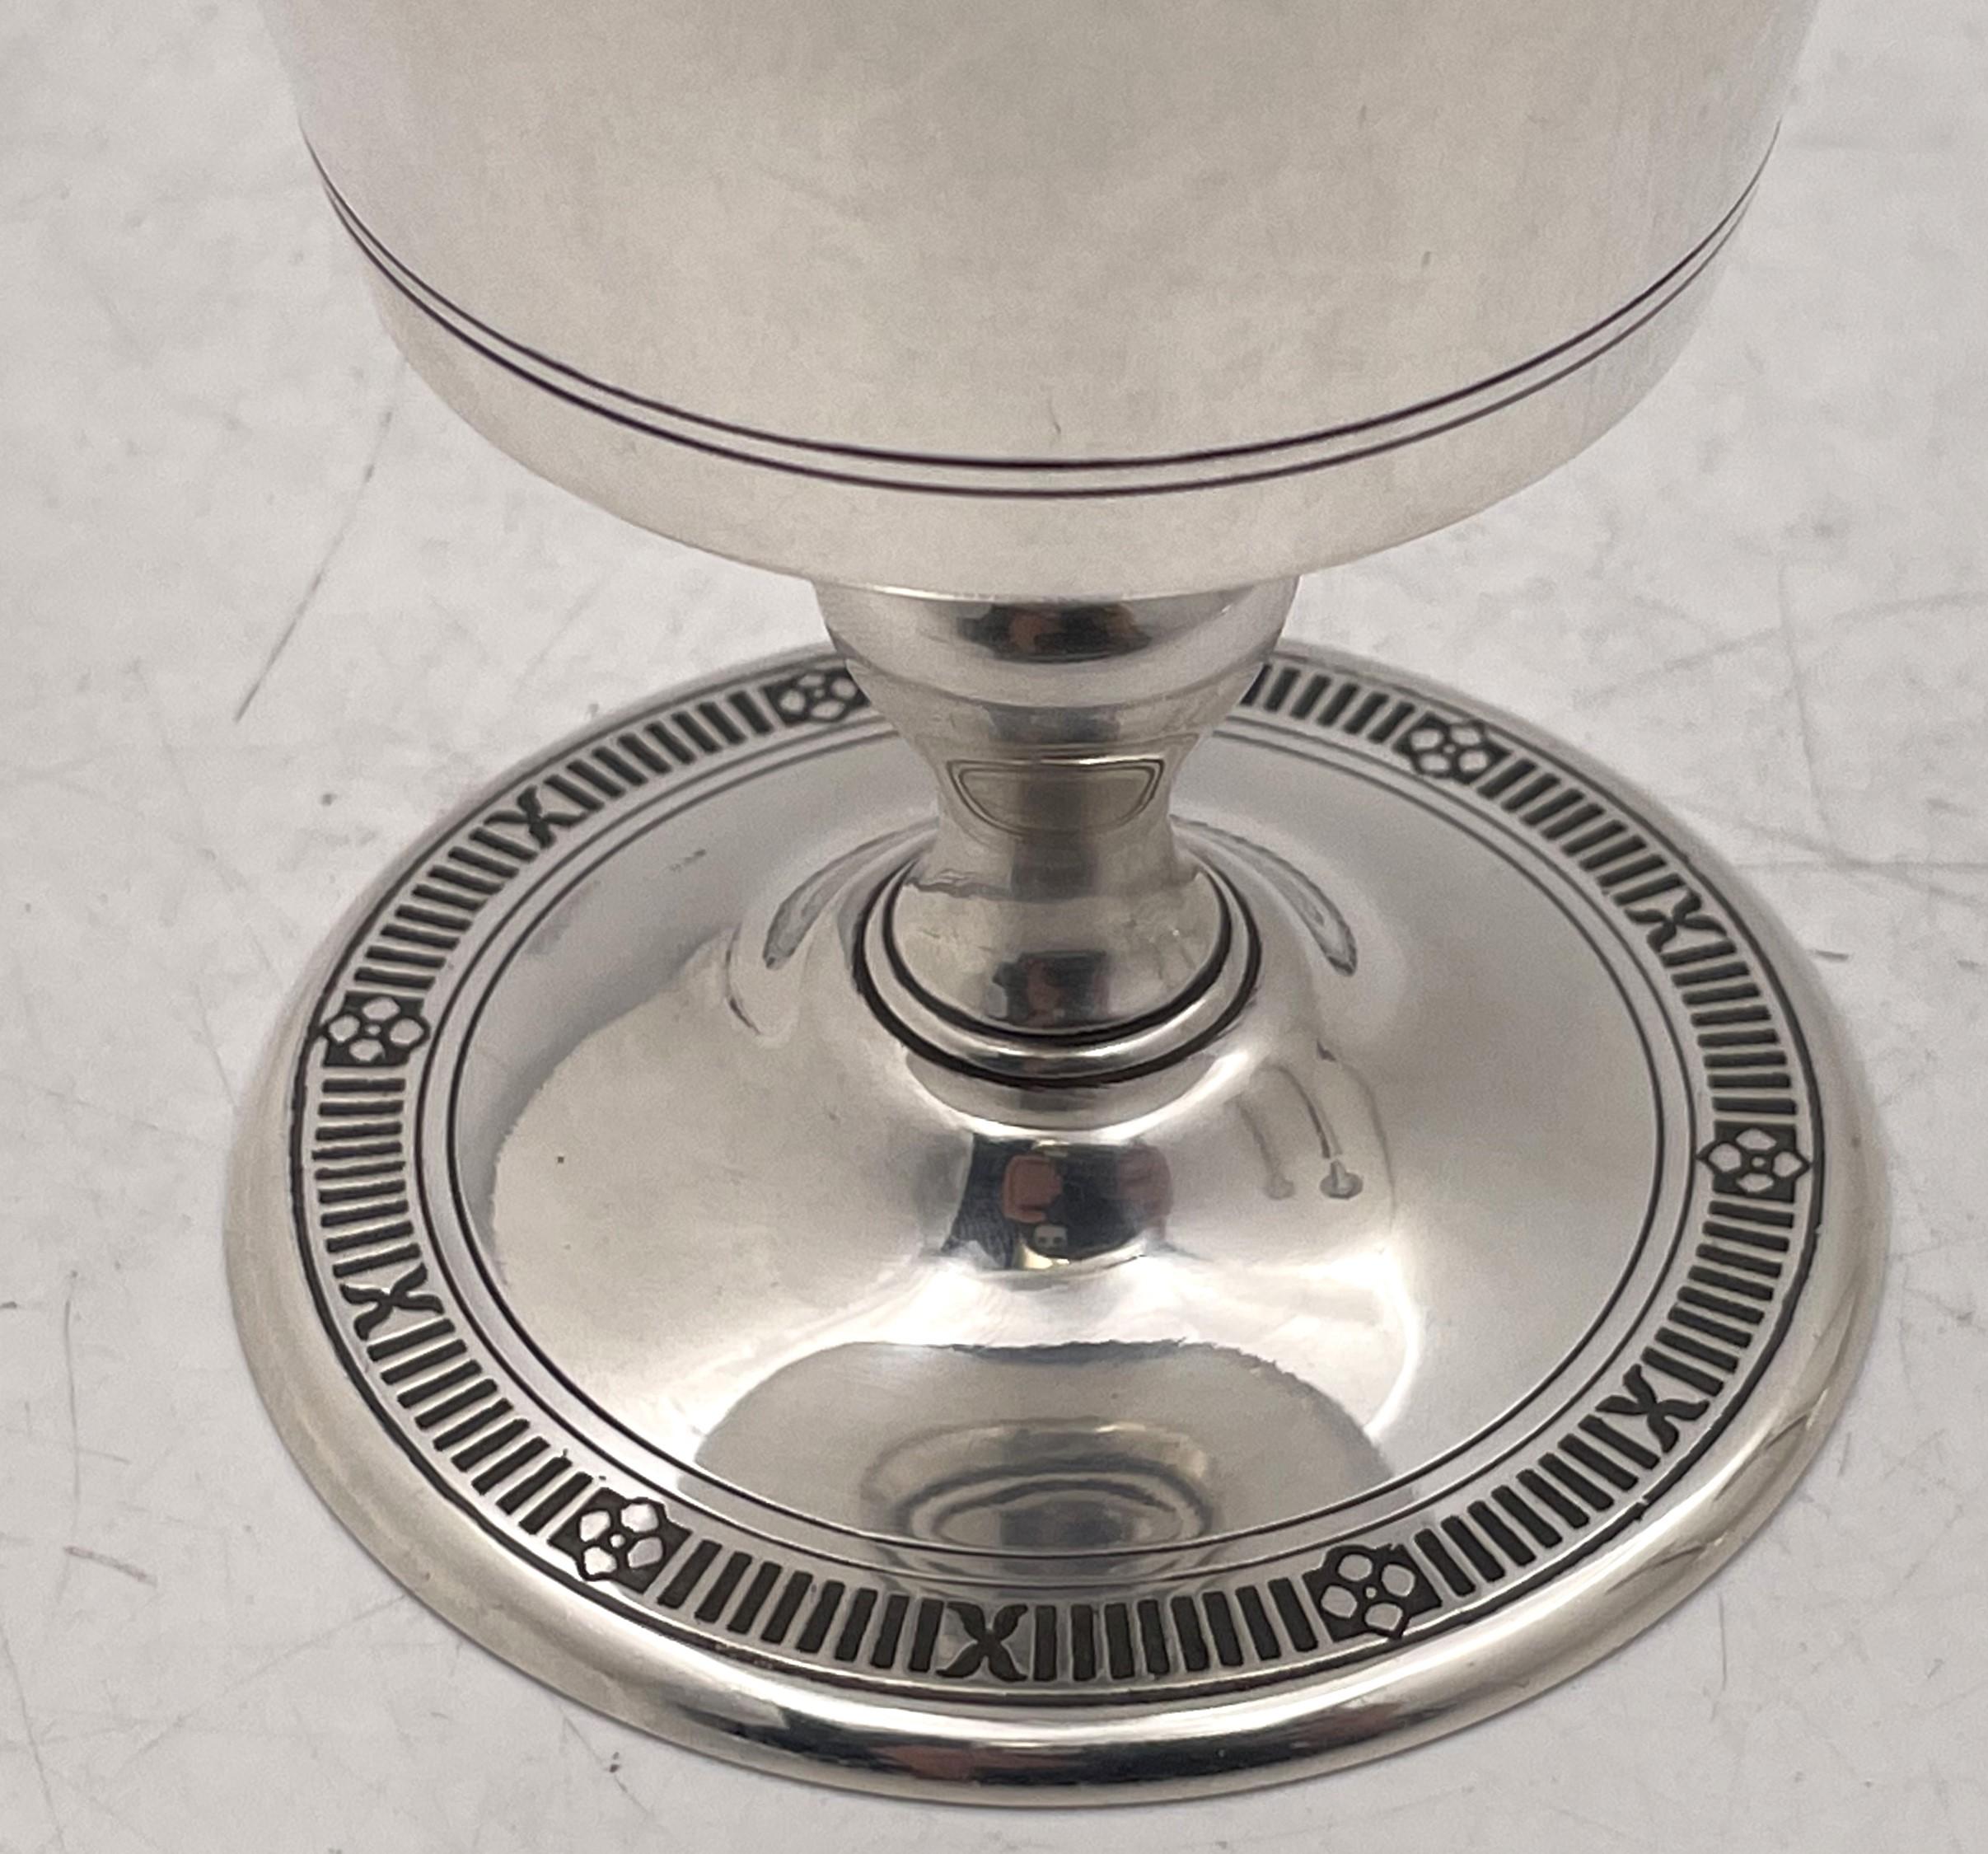 Tiffany & Co. Sterling Silver 1923 Kiddush Cup/ Goblet in Art Deco Style For Sale 1